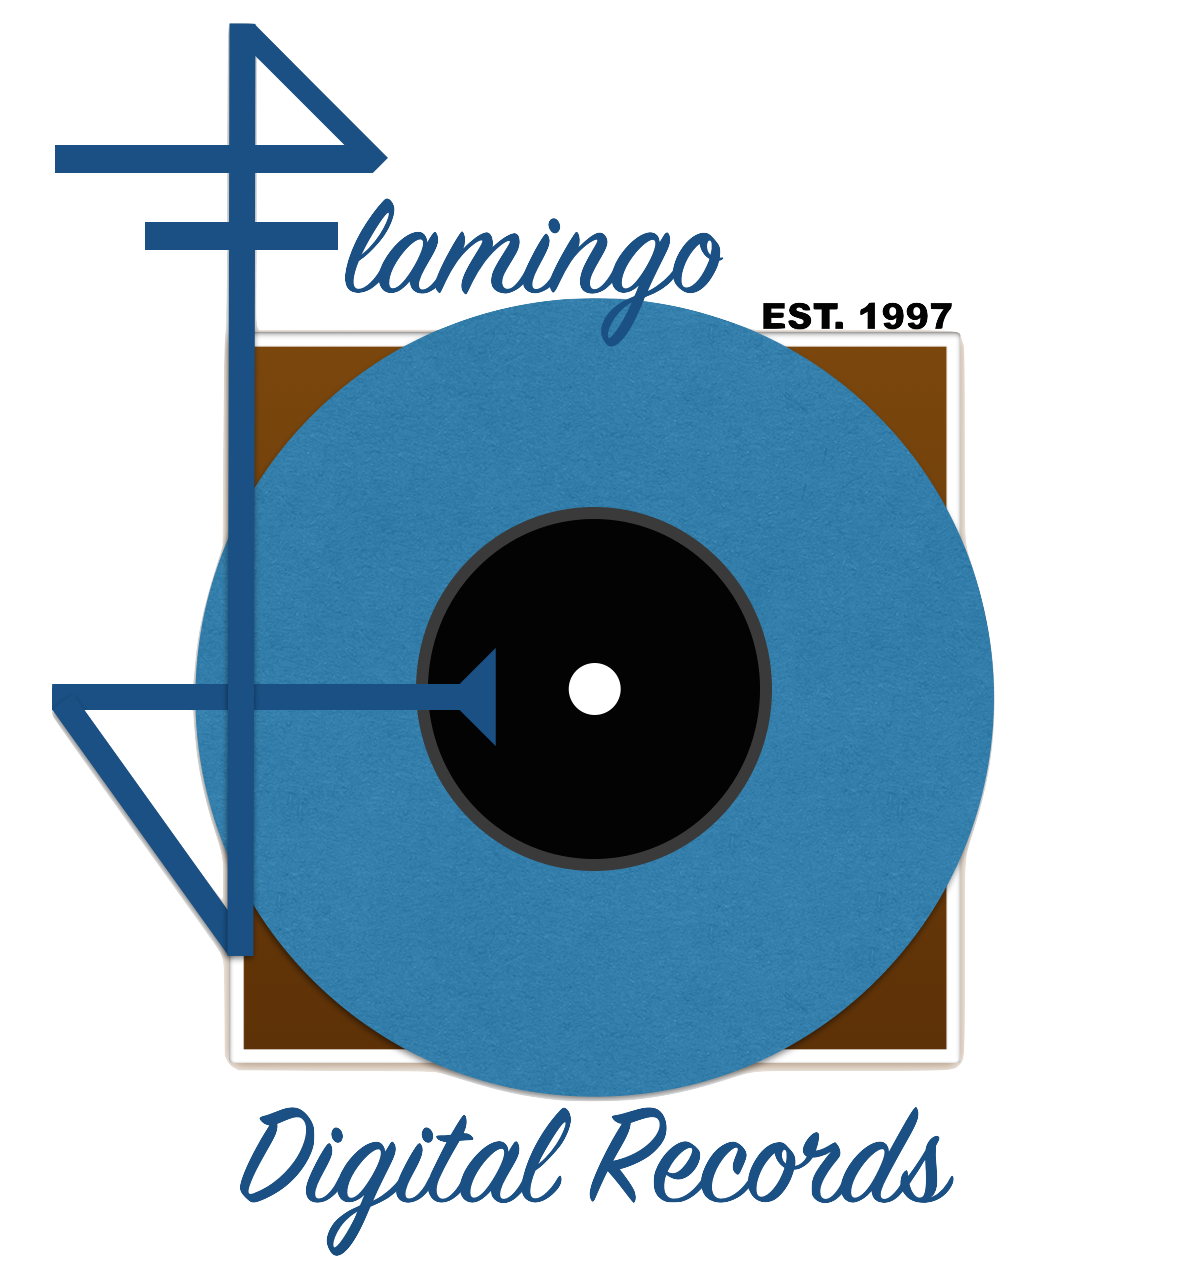 Welcome to Flamingo Digital Records!